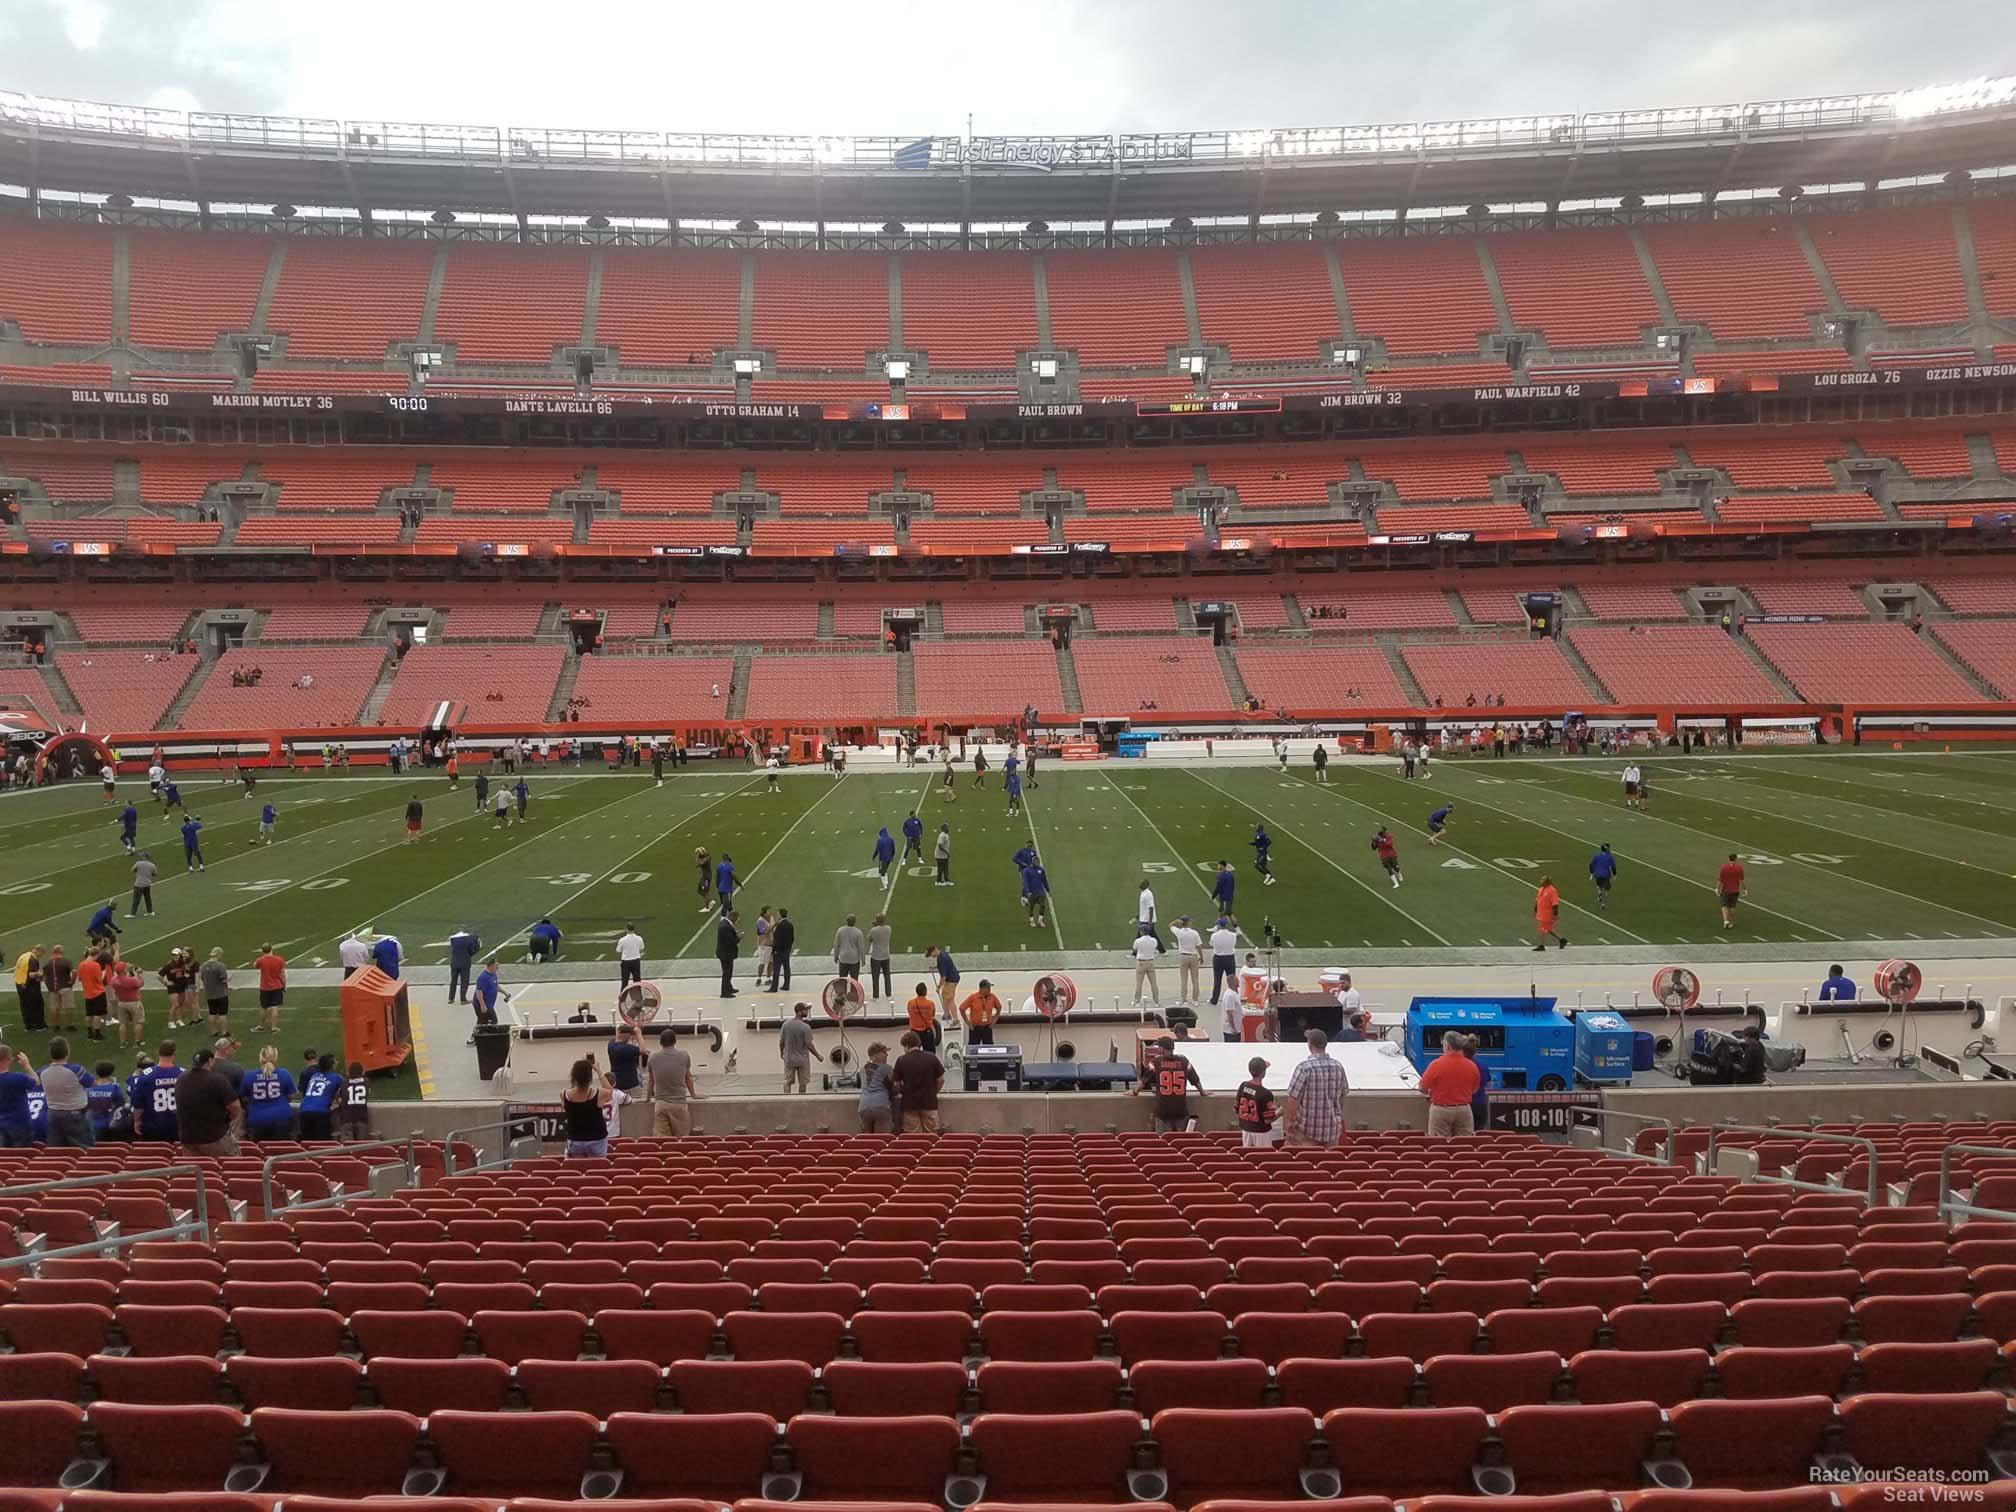 section 108, row 22 seat view  - cleveland browns stadium